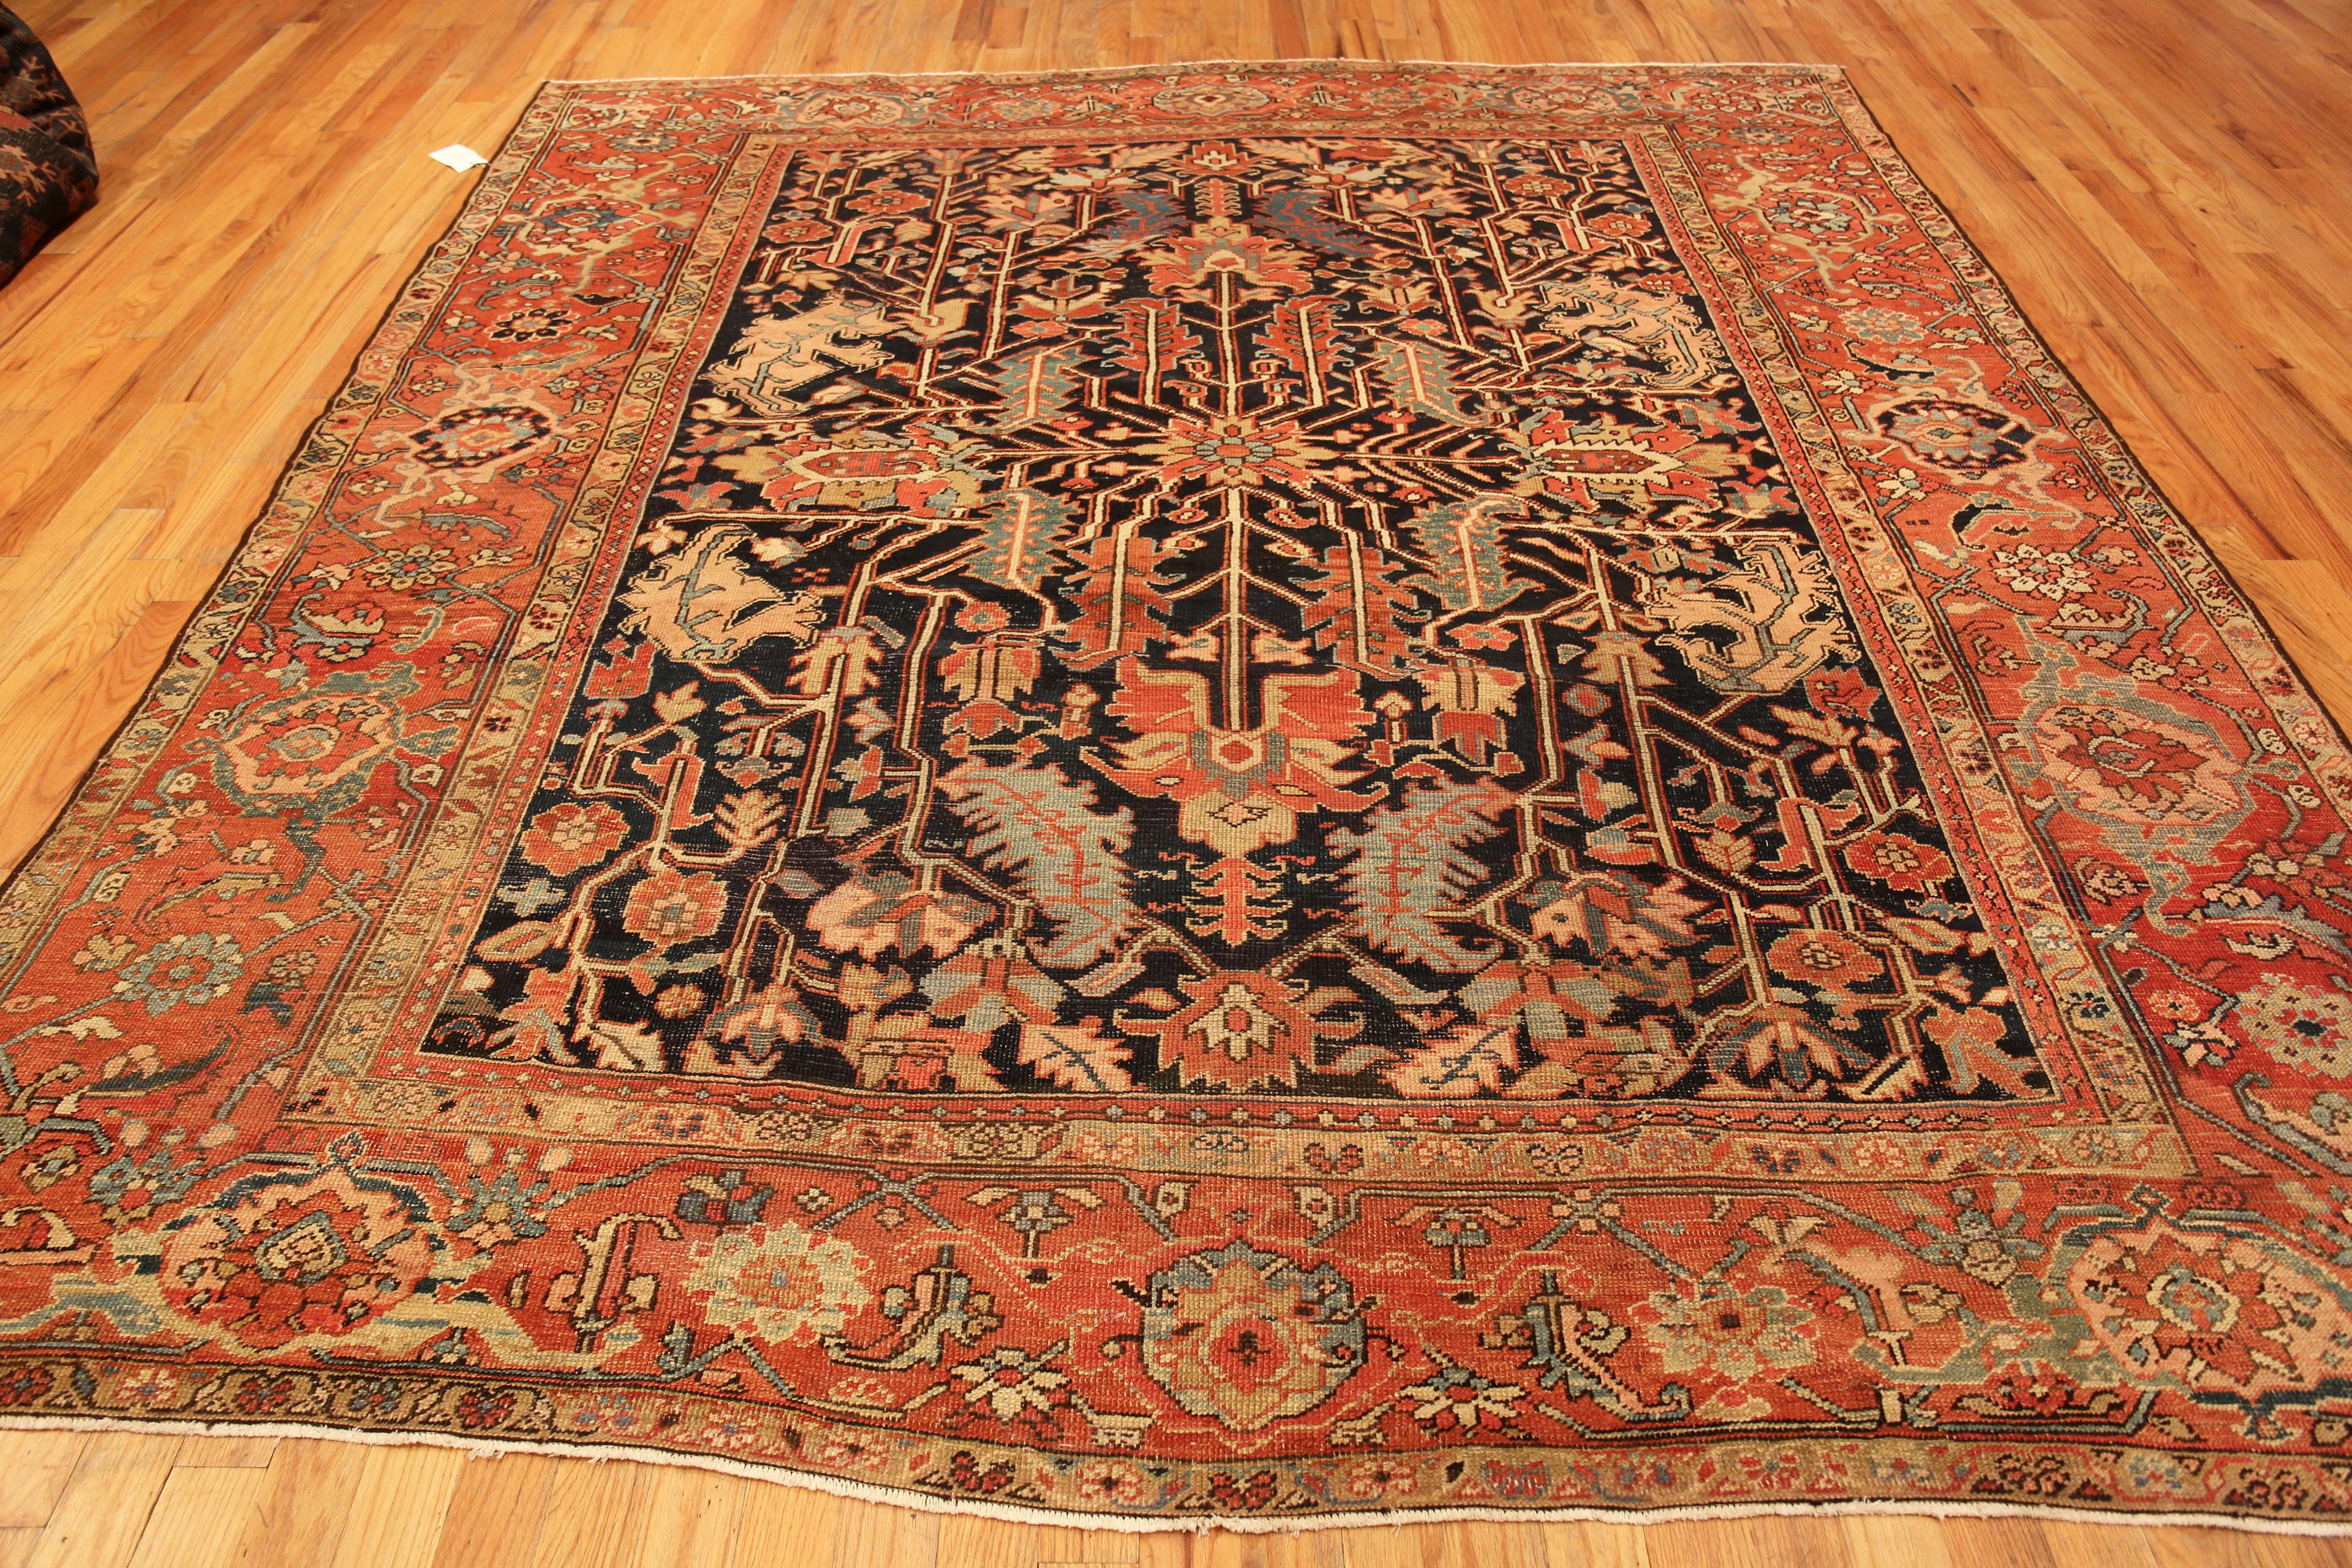 Antique Blue Persian Heriz Area Rug, Country of origin: Persia, Circa date: 1900. Size: 9 ft 4 in x 10 ft 4 in (2.84 m x 3.15 m)